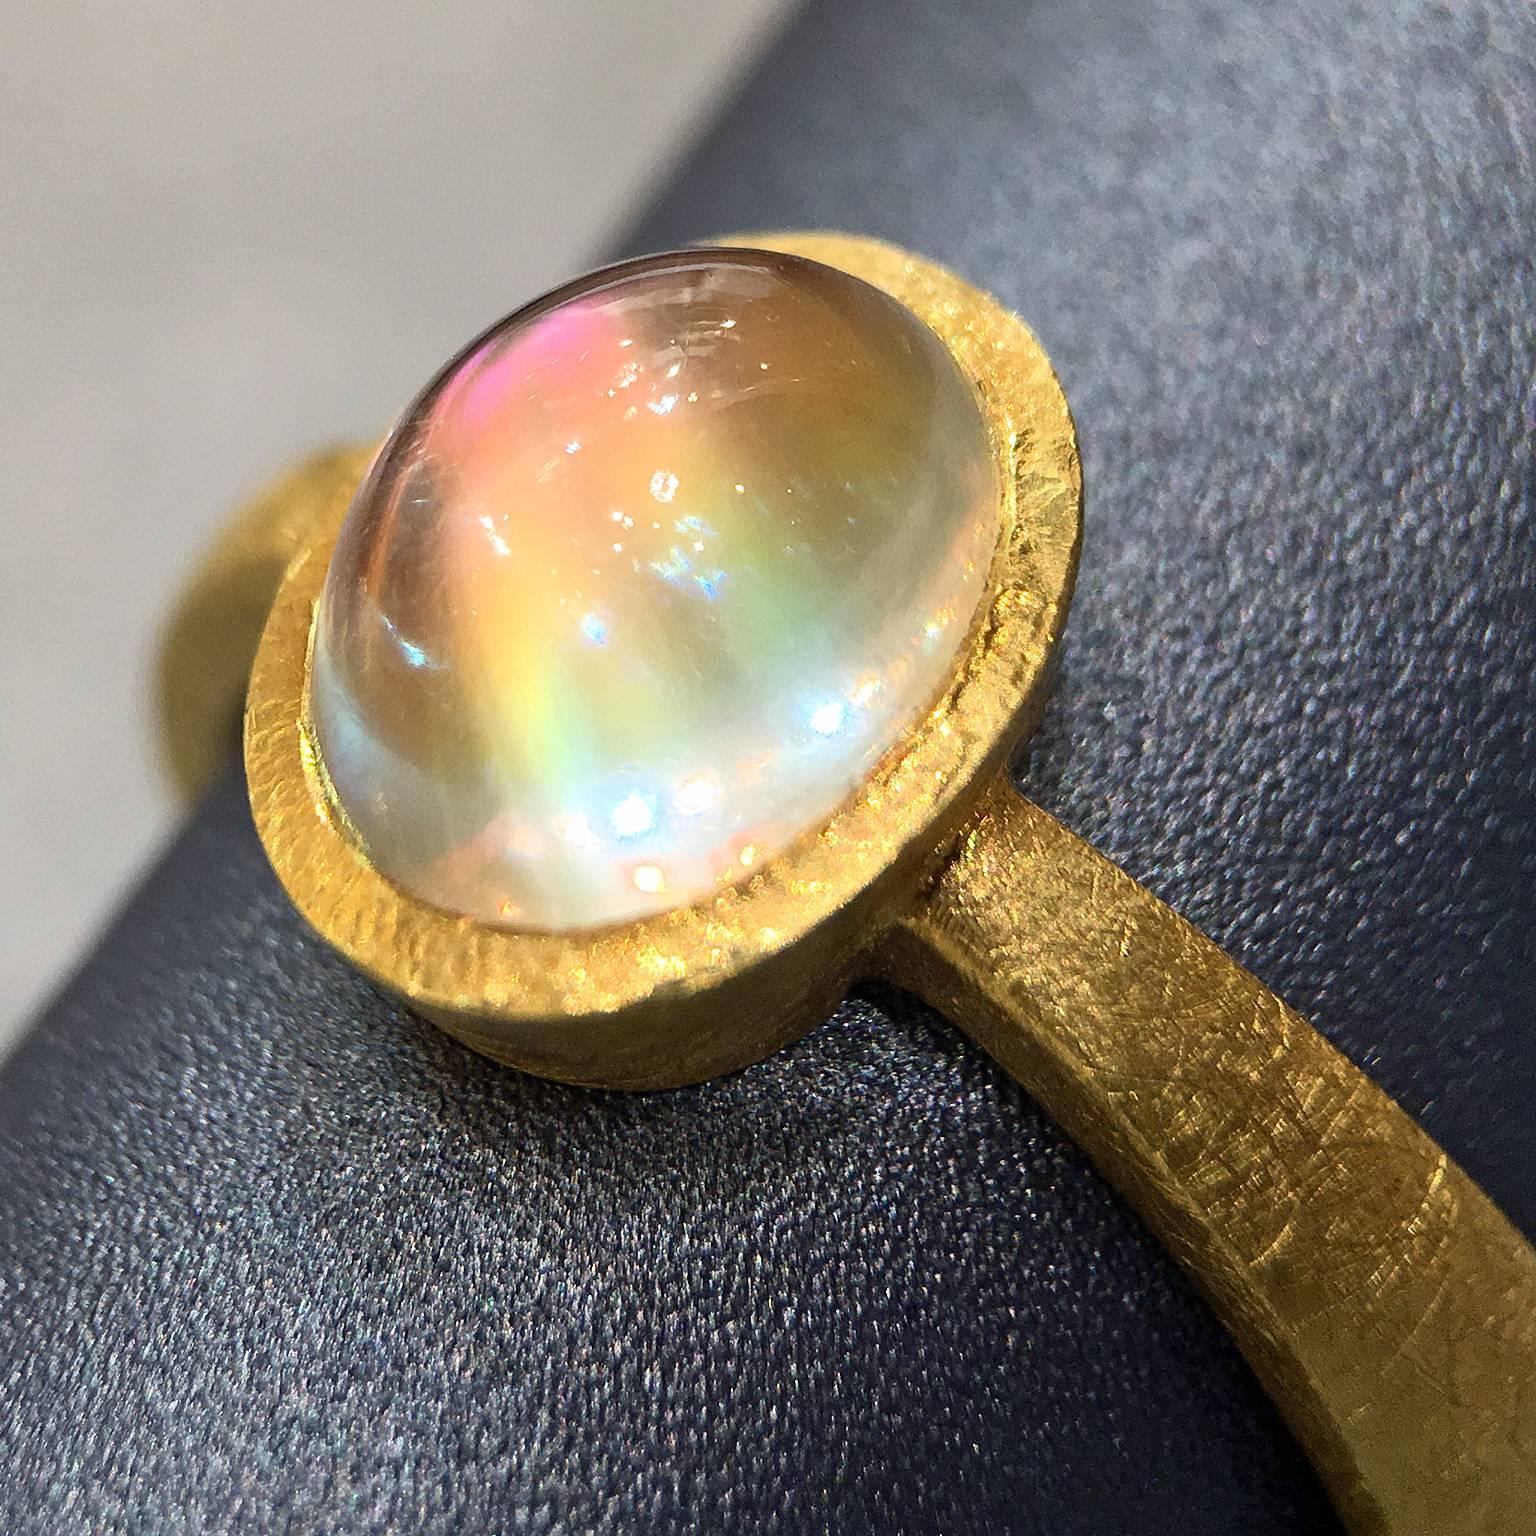 One of a Kind Ring handmade by renowned jewelry designer Devta Doolan showcasing an exceptional quality and very unusual orange rainbow moonstone with vibrant flash featuring all colors of the rainbow. The extraordinary gemstone is bezel-set on a